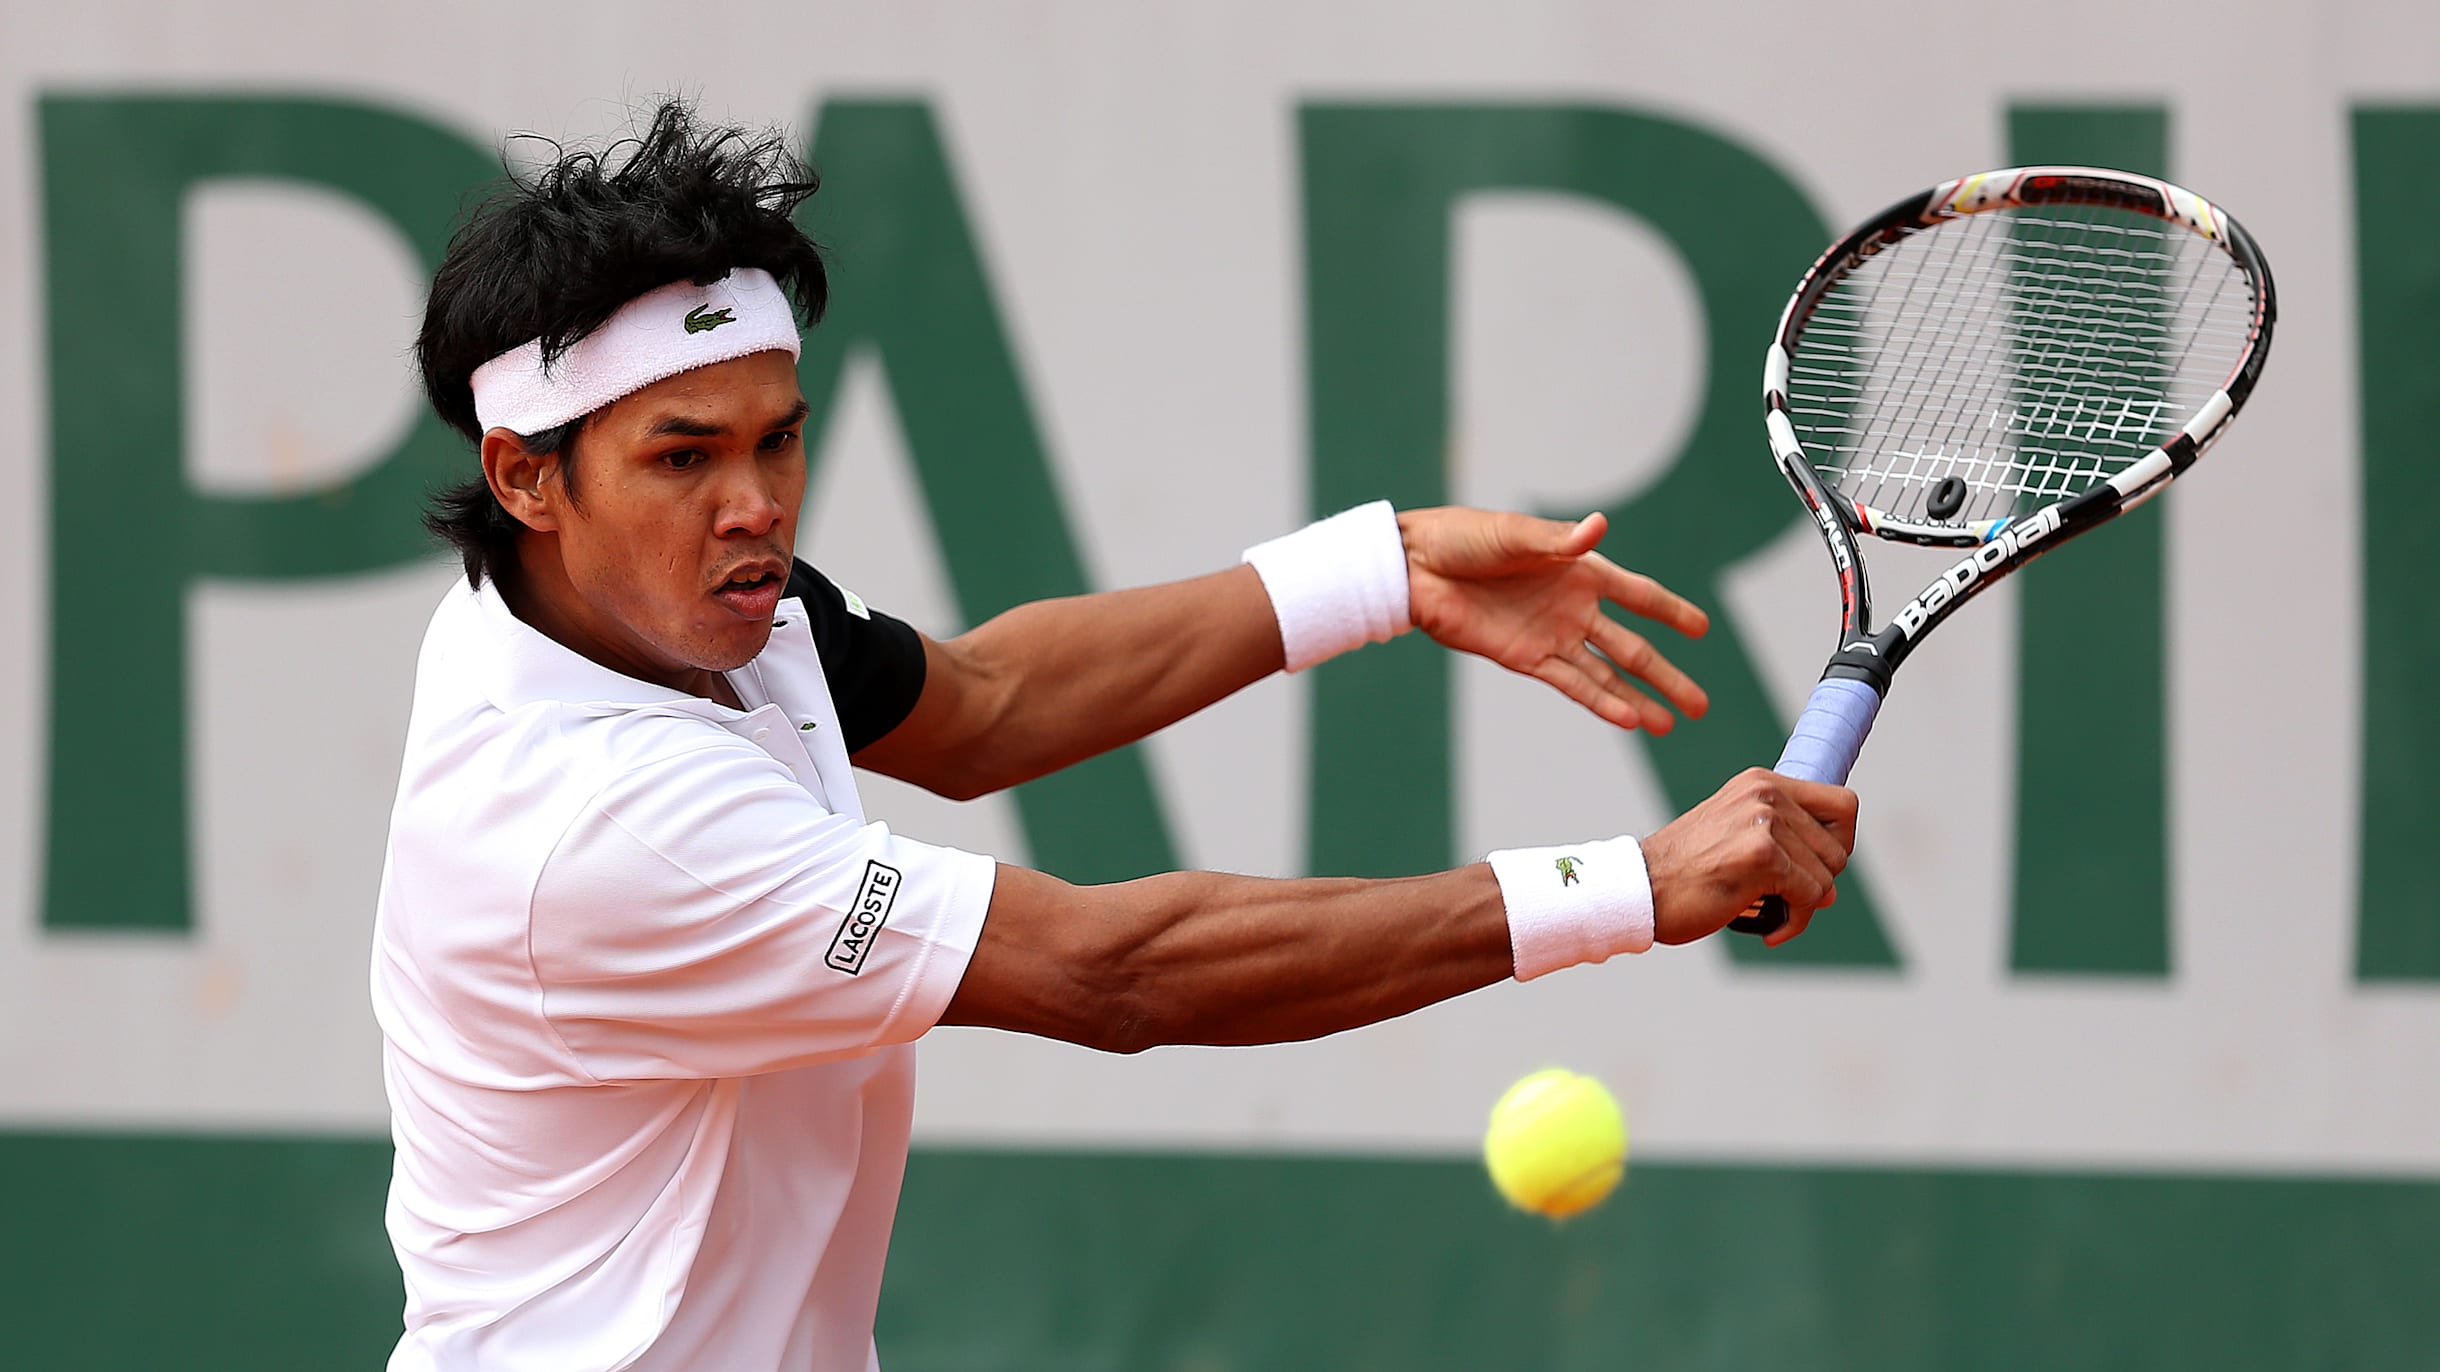  Somdev Devvarman Faced Rafael Nadal for a Place in QF at Indian Wells 2011